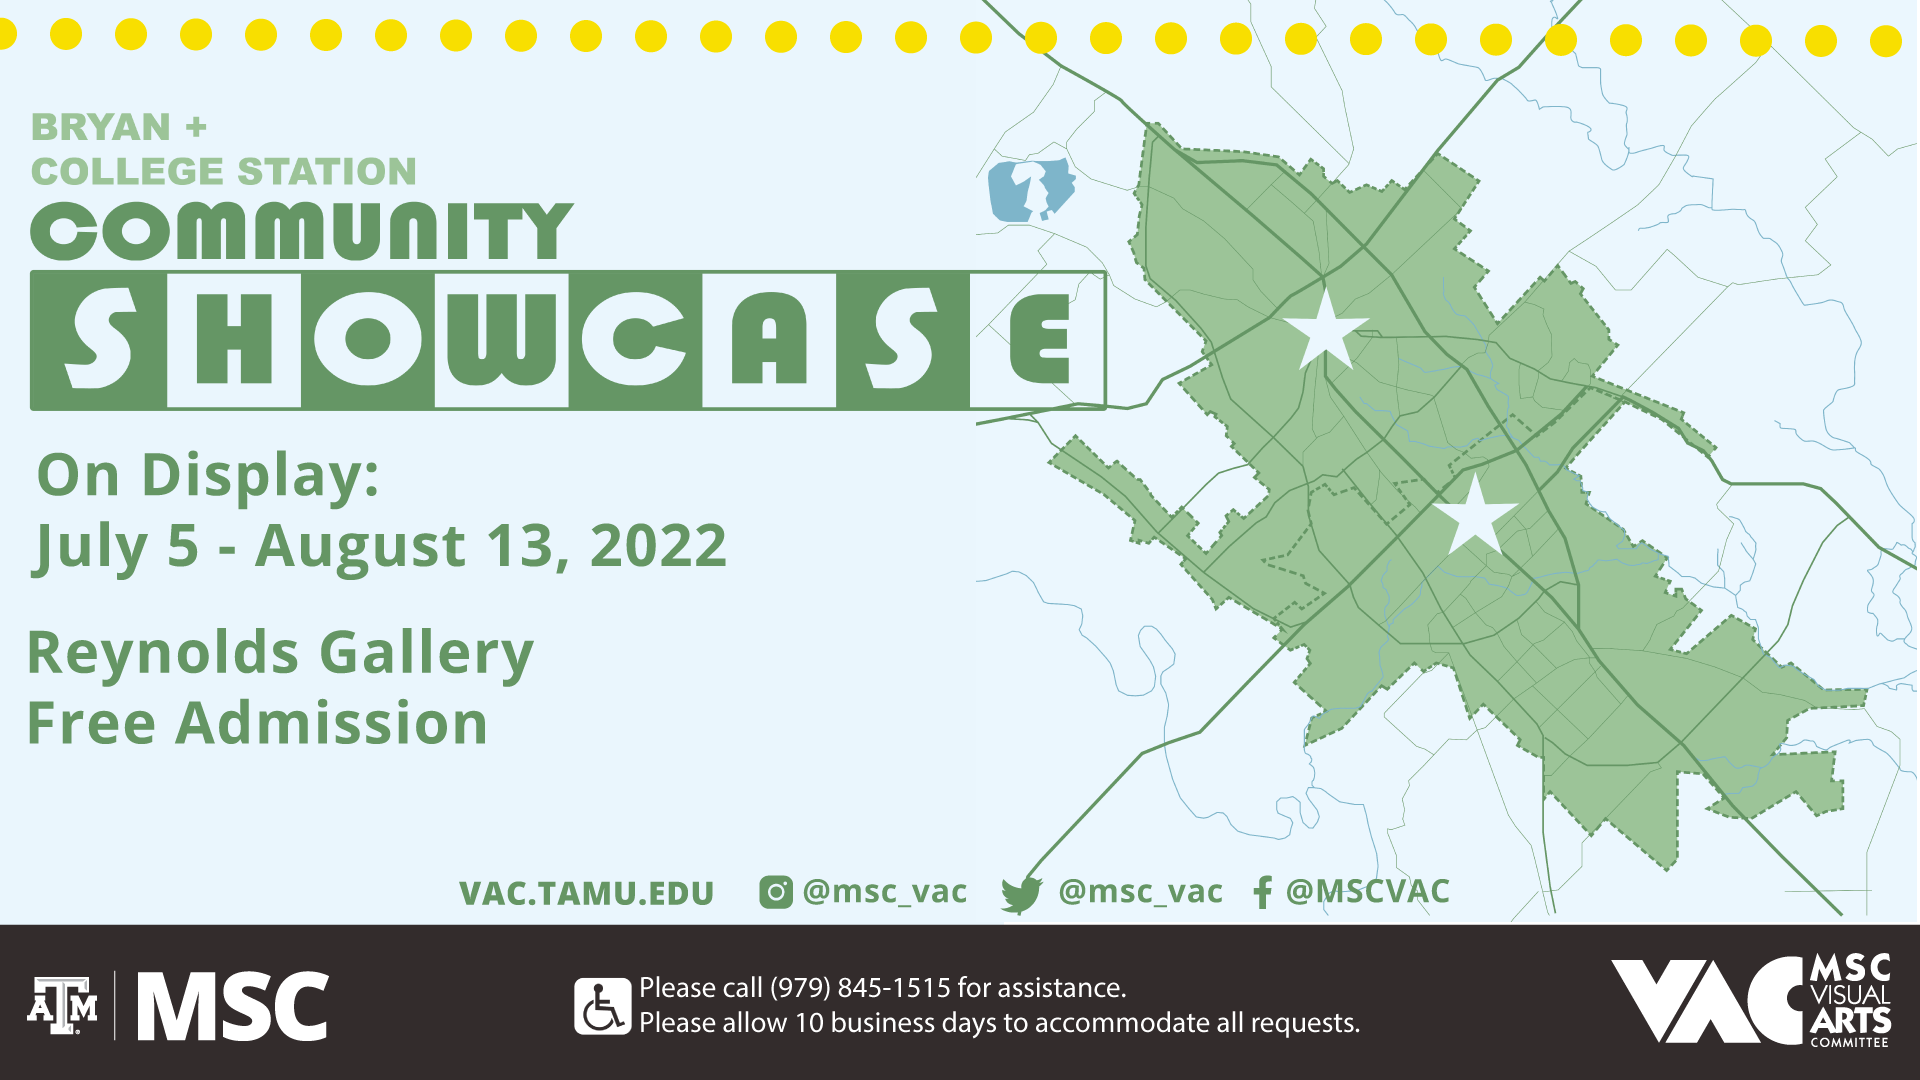 MSC VAC Presents Bryan and College Station Community Showcase, On display: July 5-August 13, 2022 at the Reynolds Gallery, Free admission. Website: vac.tamu.edu, Instagram: @msc_vac, Twitter: @msc_vac, Facebook: @MSCVAC Please call 979 845 1515 for assistance. Please allow 10 business days to accommodate all requests.